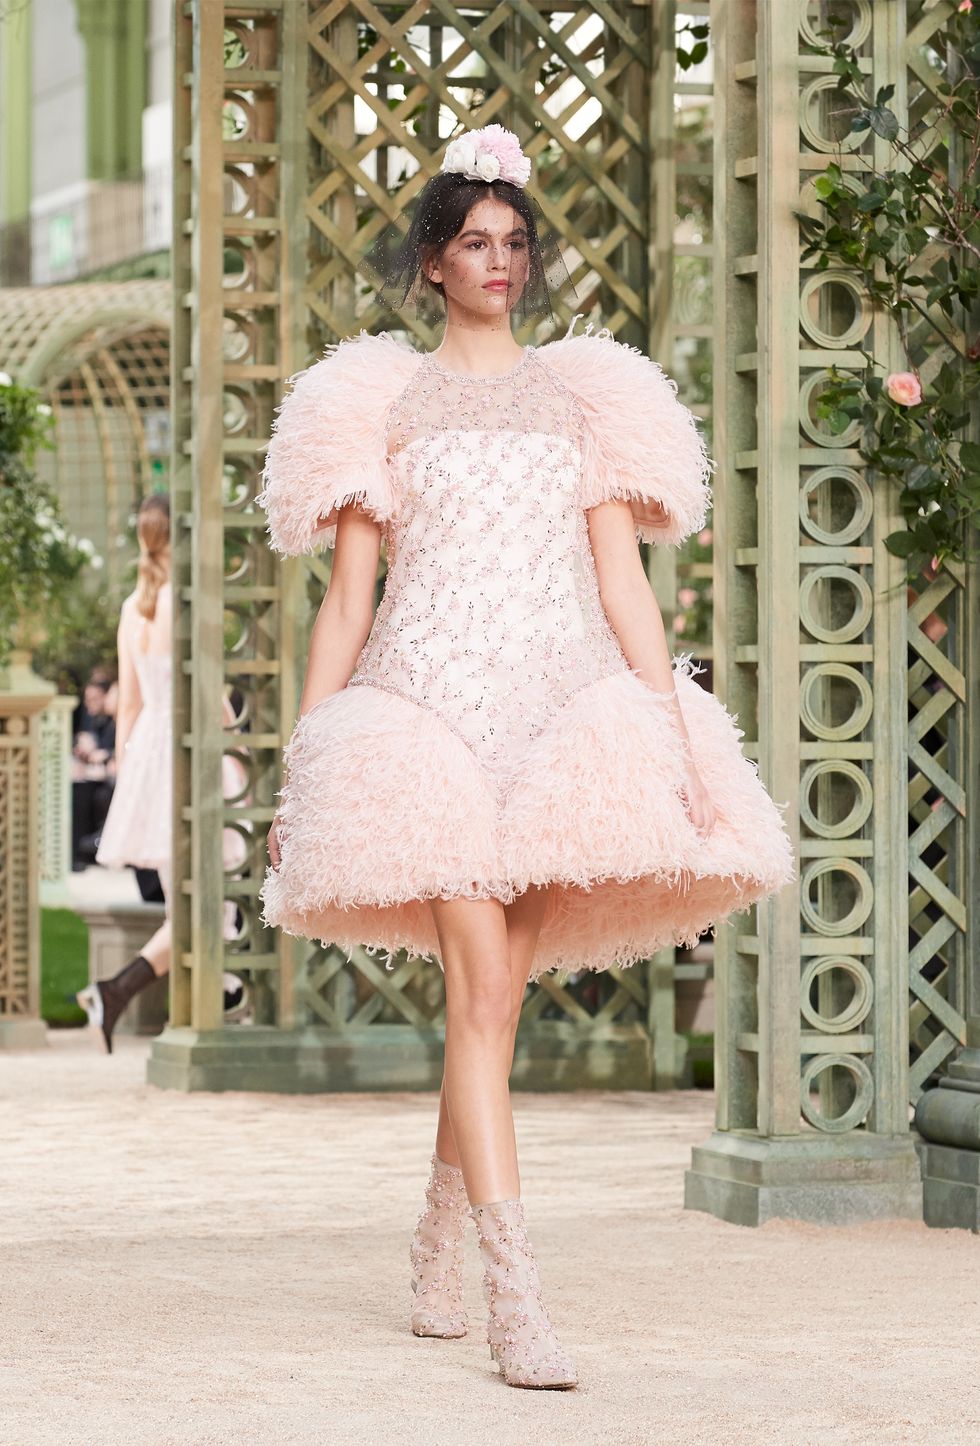 Kaia Gerber in Chanel spring 2018 couture